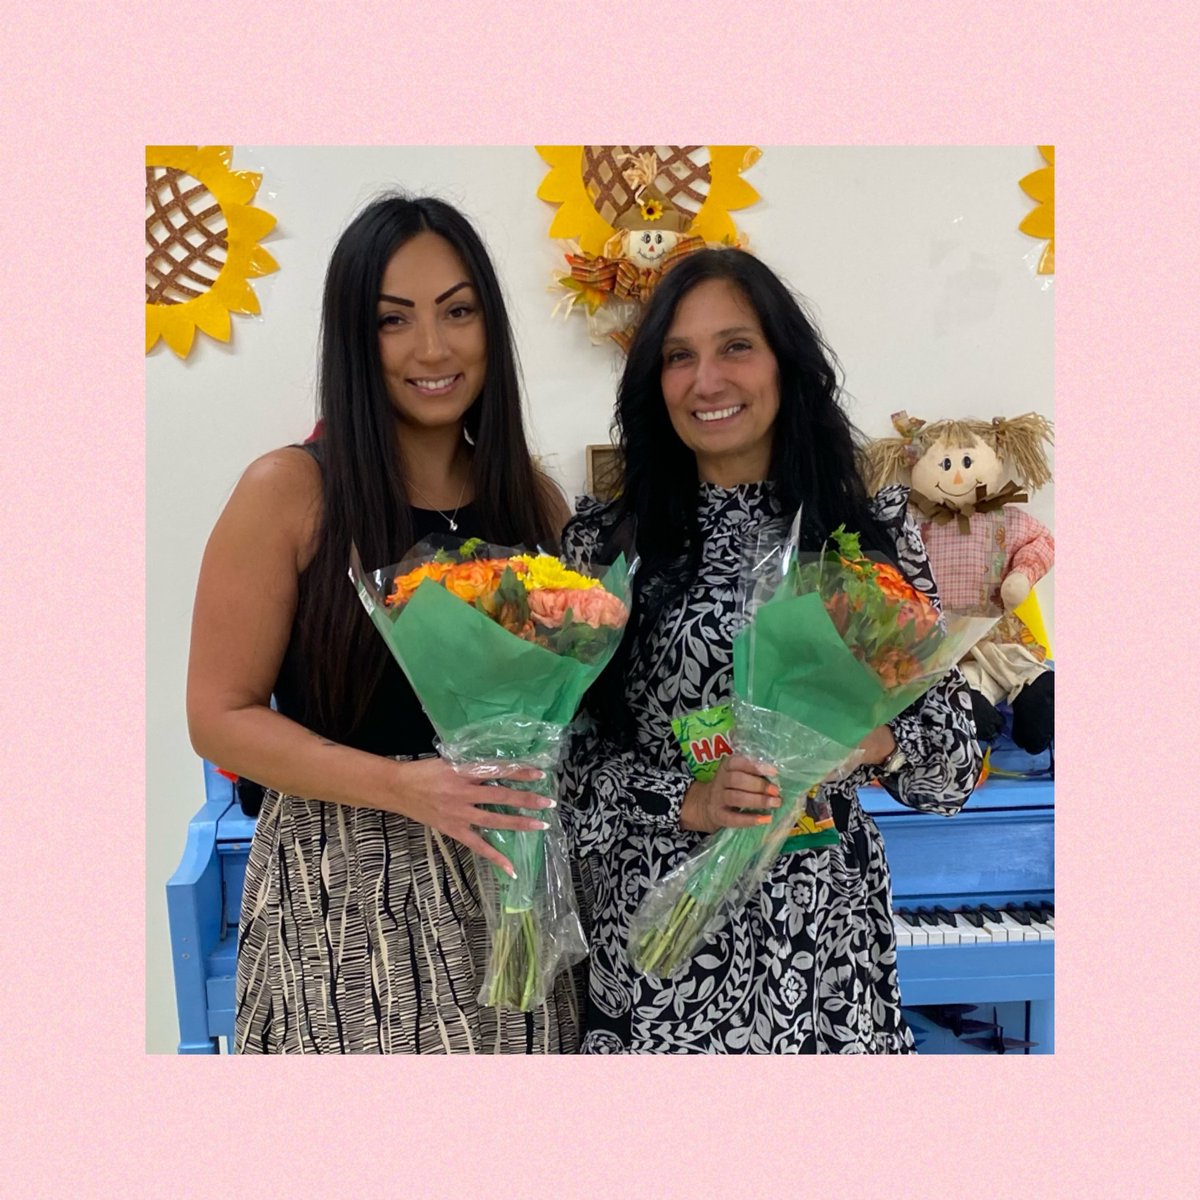 Best team! Celebrating Ms Rao our Acting Assistant Principal & Ms Iacono Site Coordinator at Richmond Ave. Beautiful ladies with beautiful hearts who have a wealth of knowledge of early childhood @EdeleWilliams @DrMarionWilson @shah_reen1007 @D31DSPalton @CSD31SI @CChavezD31